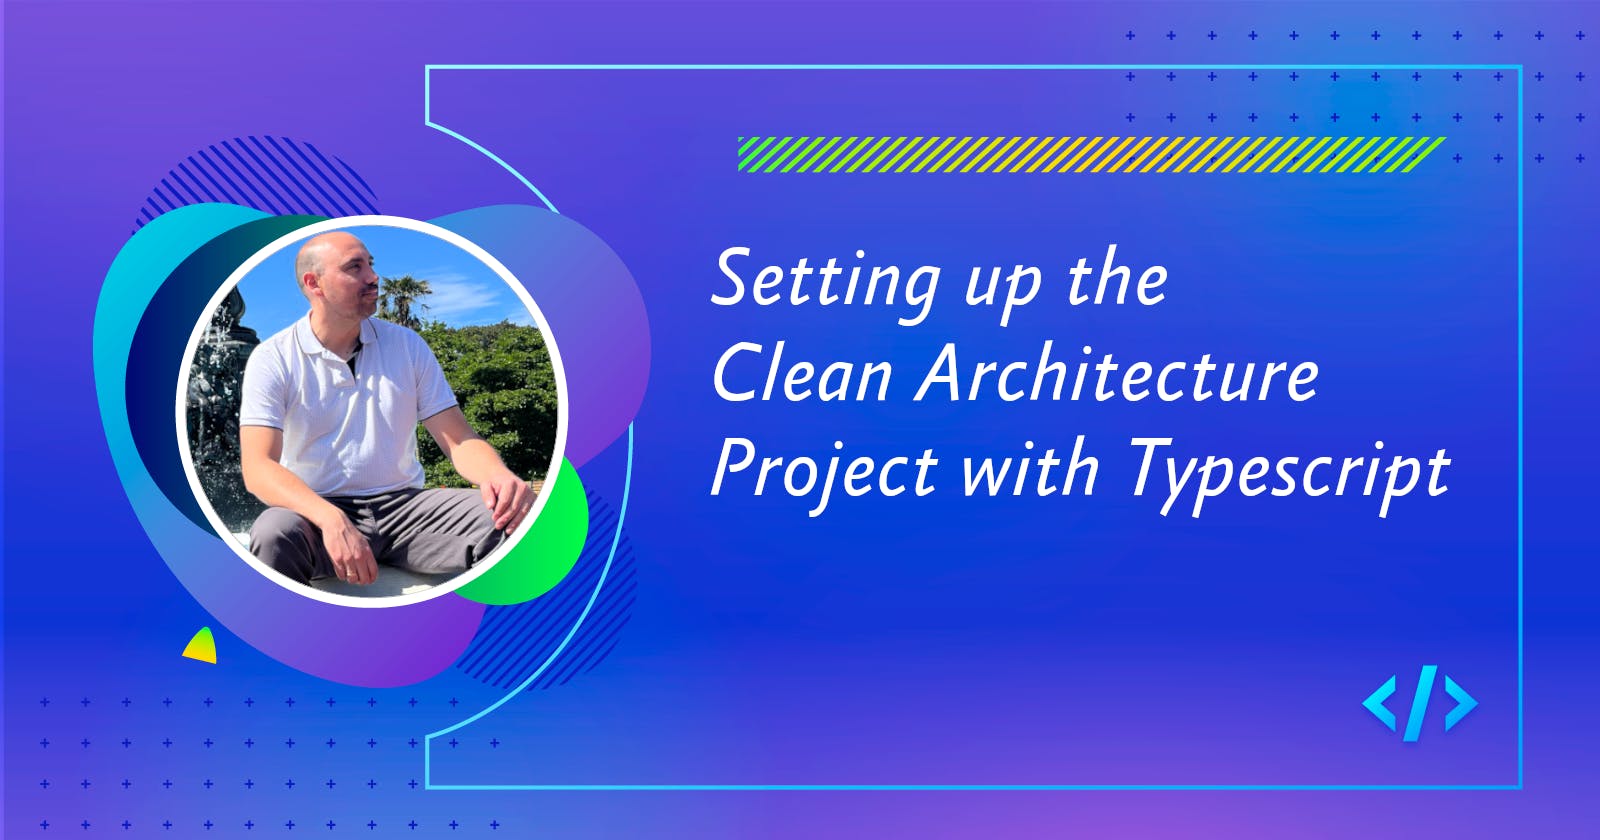 Setting up the Clean Architecture Project with Typescript